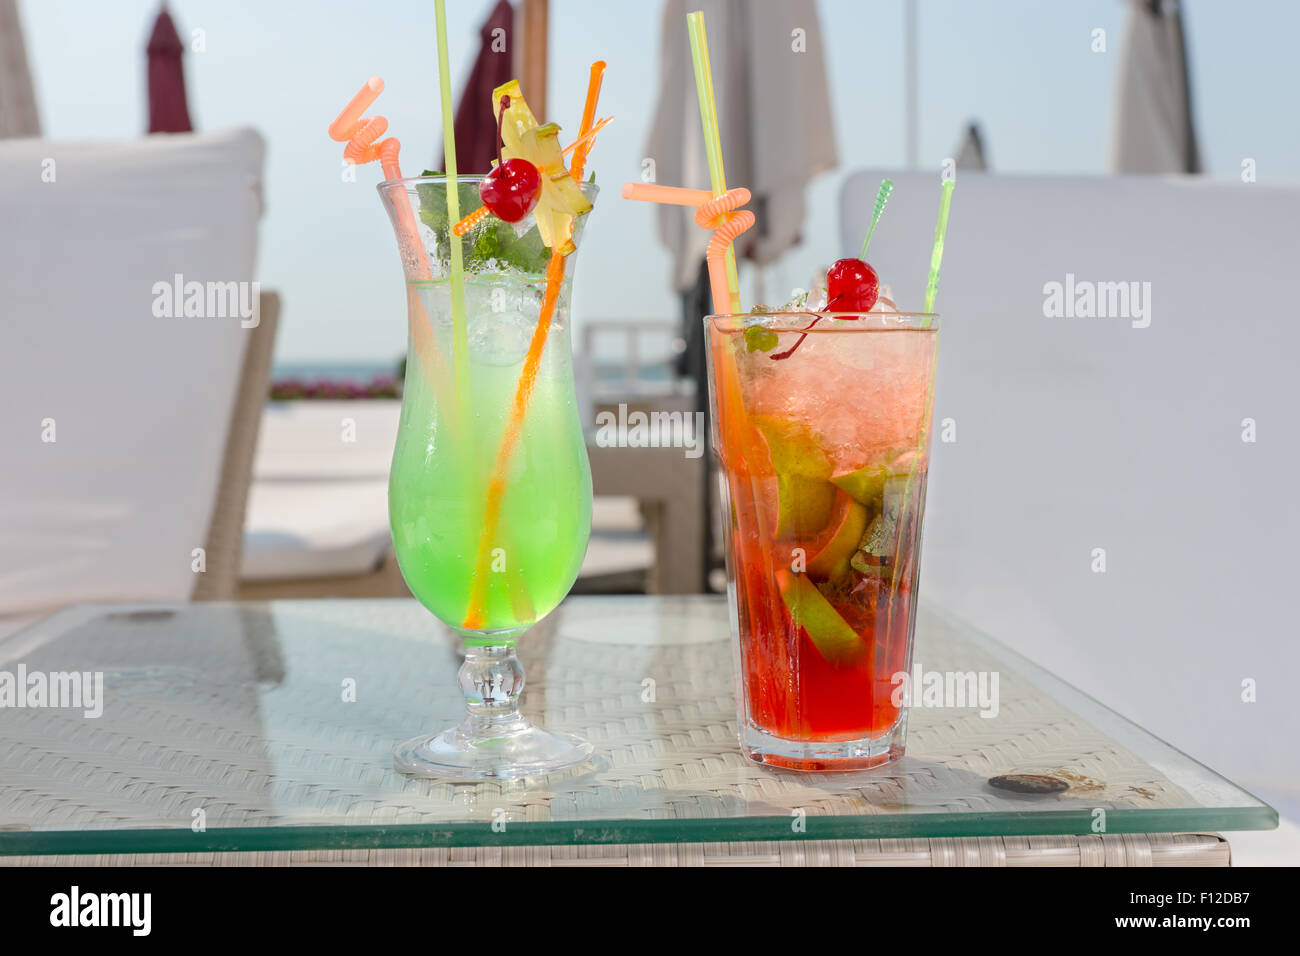 Two colorful tropical cocktails on ice standing side by side on a table amongst recliner chairs and umbrellas at a seaside resort on a summer vacation. Stock Photo